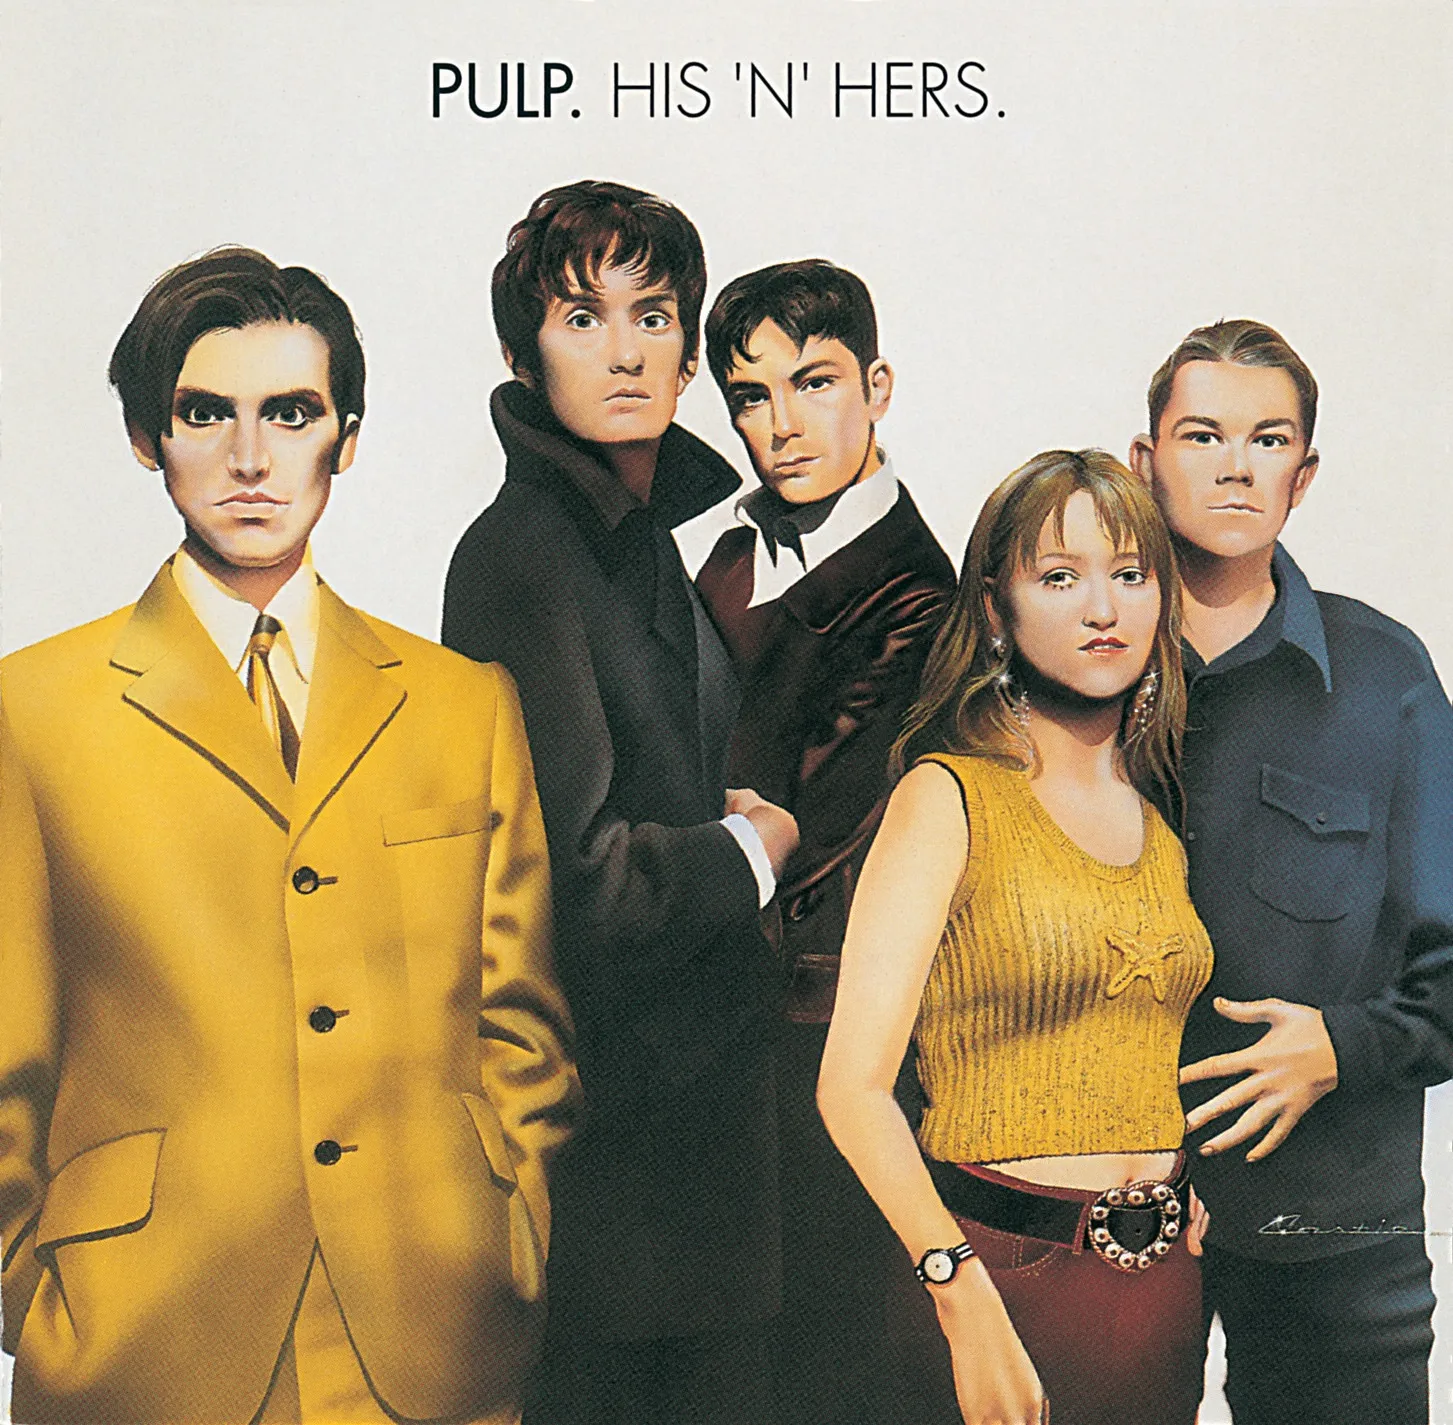 <strong>Pulp - His 'n' Hers</strong> (Vinyl LP - black)